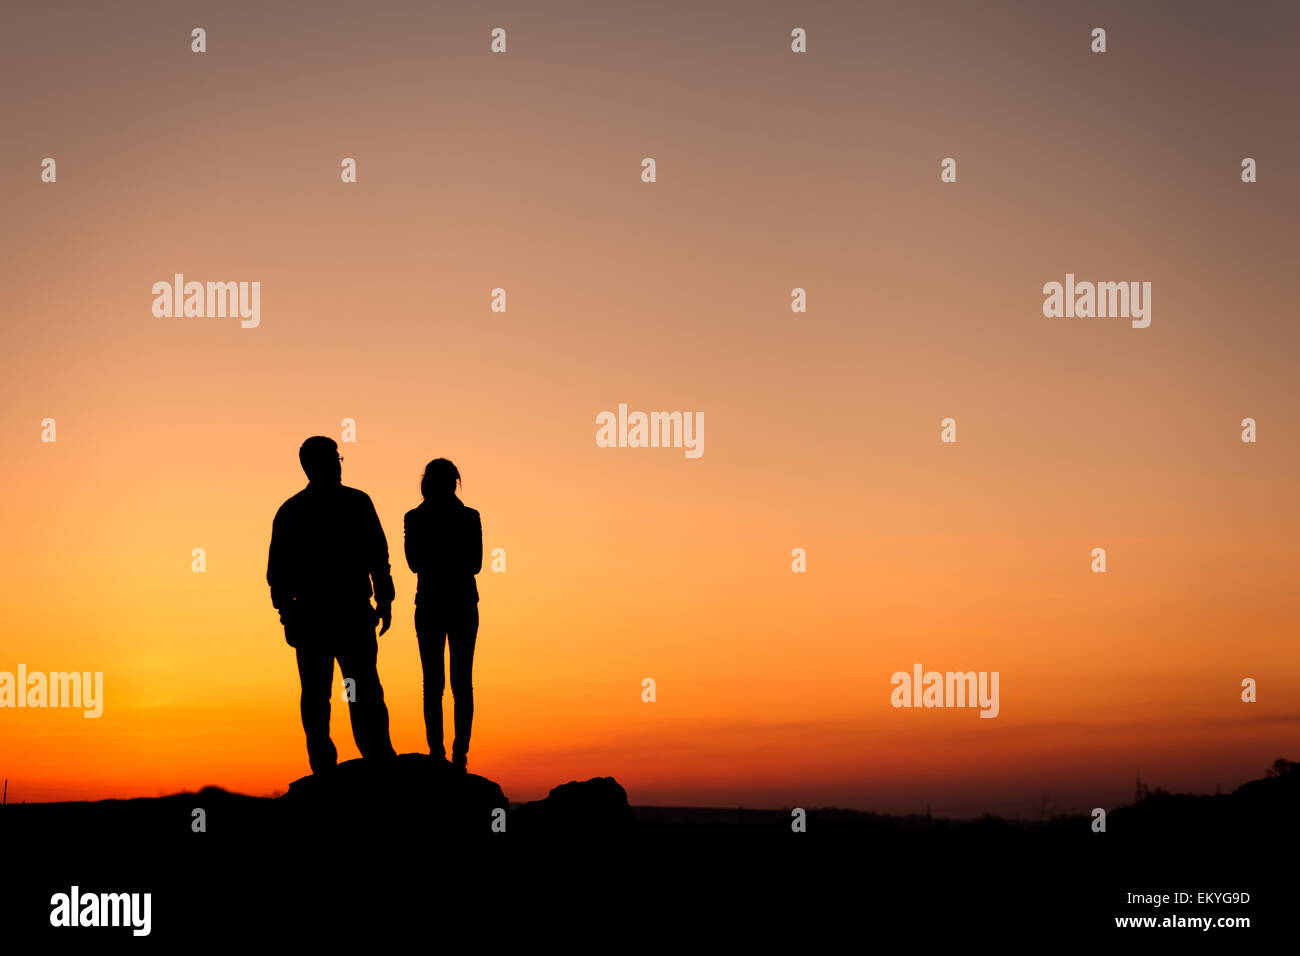 Silhouette of happiness family against beautiful colorful sky. Summer Sunset. Landscape Stock Photo